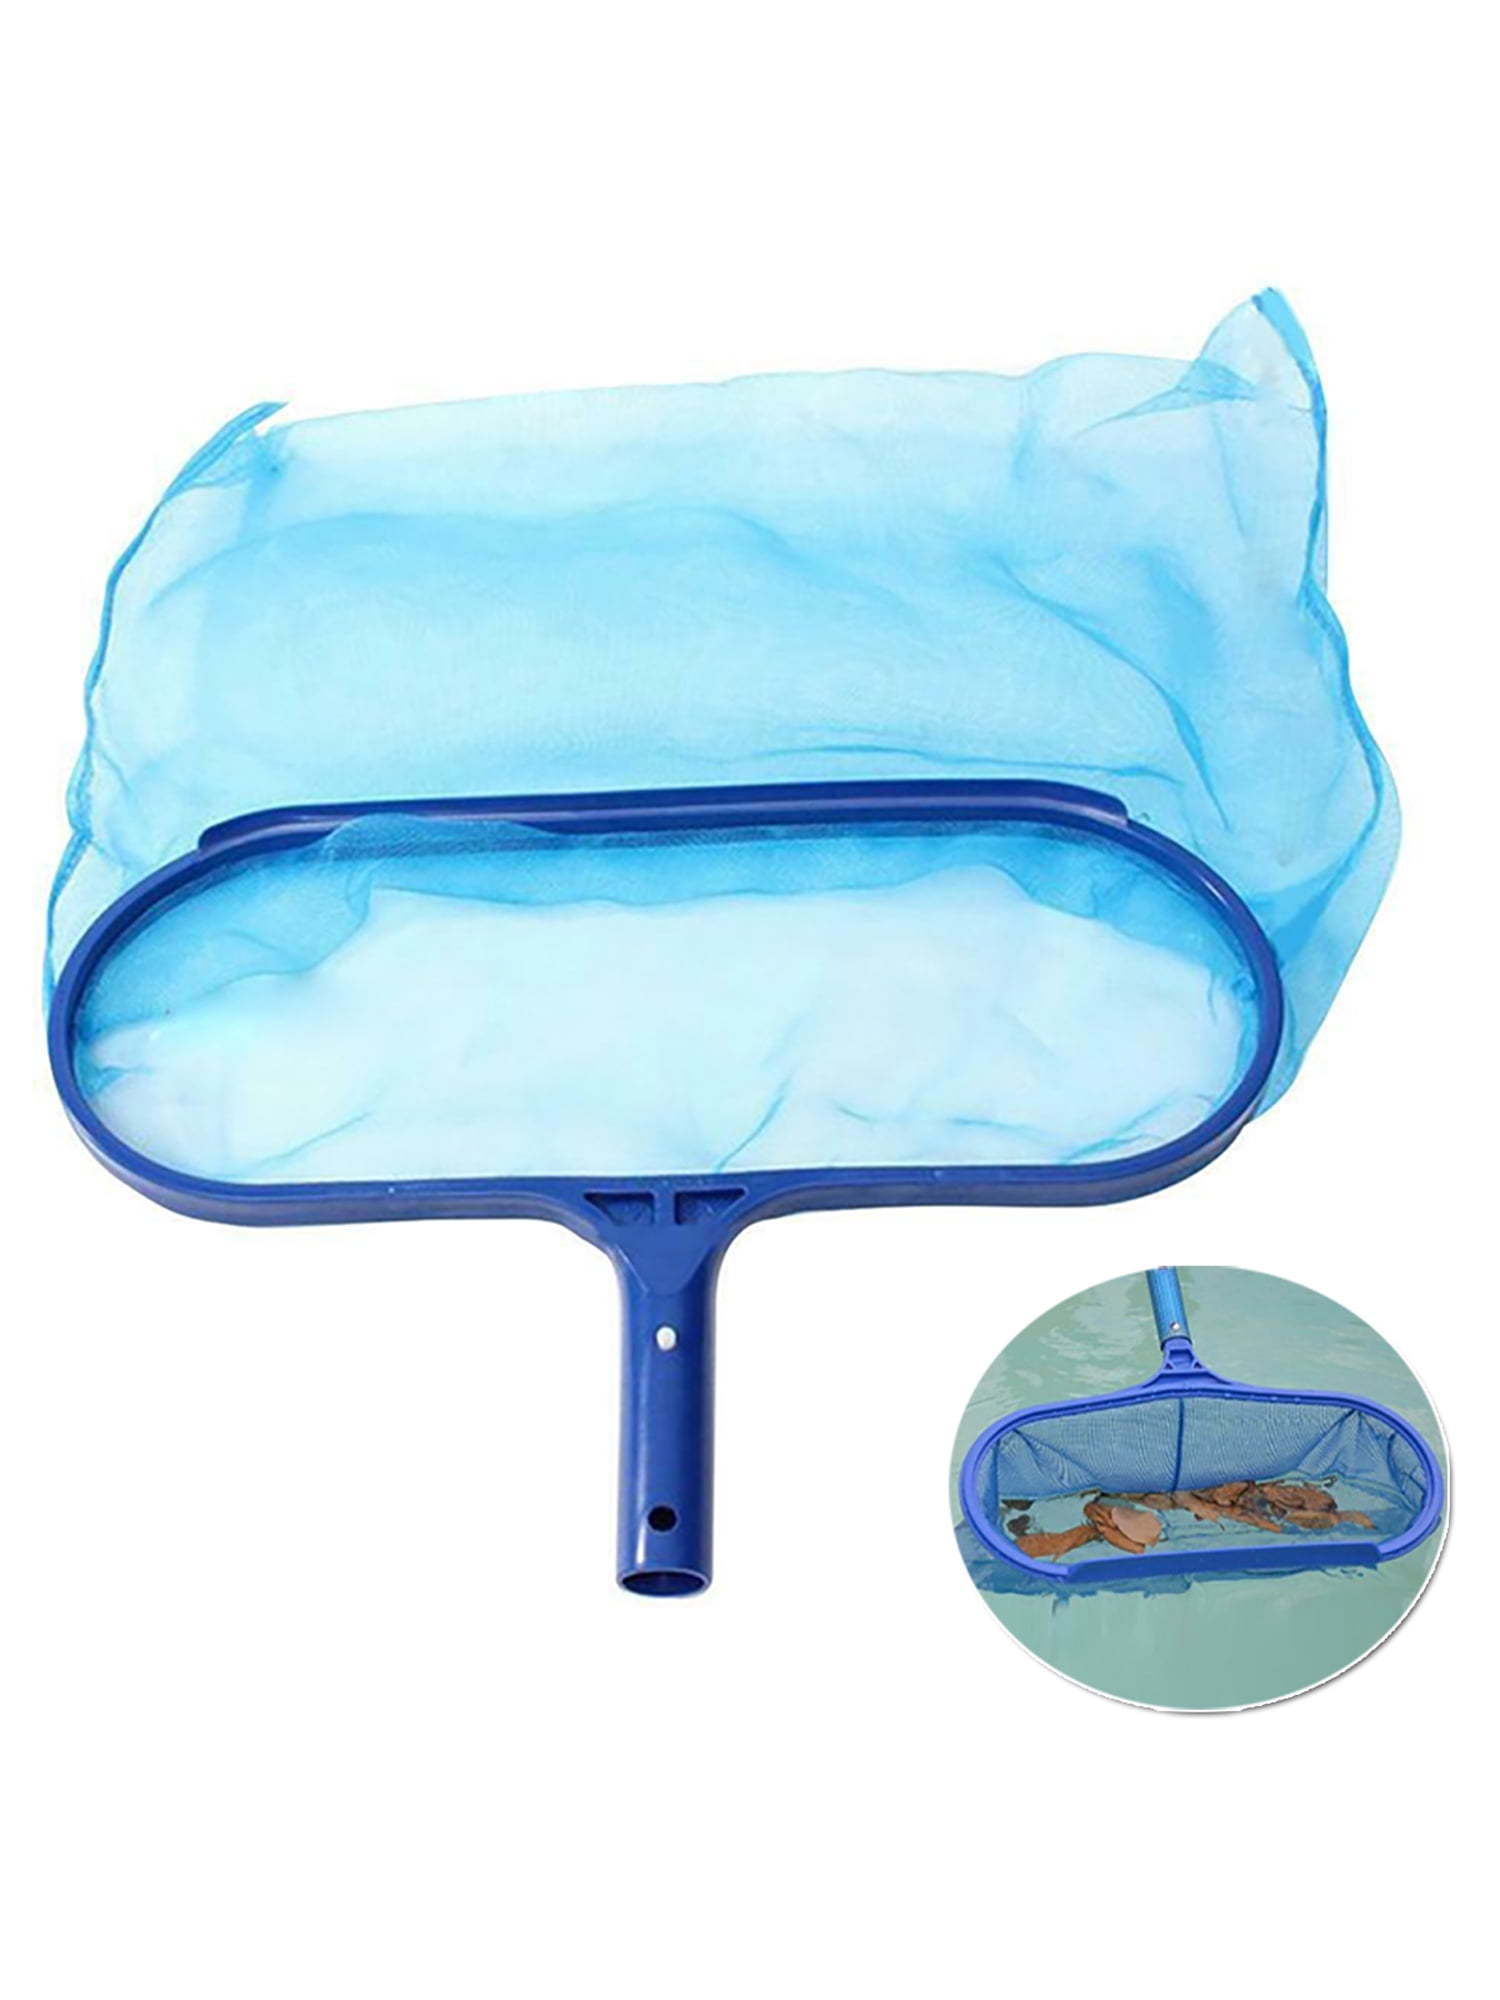 Professional Leaf Rake Mesh Frame Net Skimmer Cleaner Tool Head and for Cleaning Dirt Moss of Pond Spa Hot Spring Tubs Walls Tile Floors Algae Clean Brushes Sets WakeDay Swimming Pool Cleaning Tools